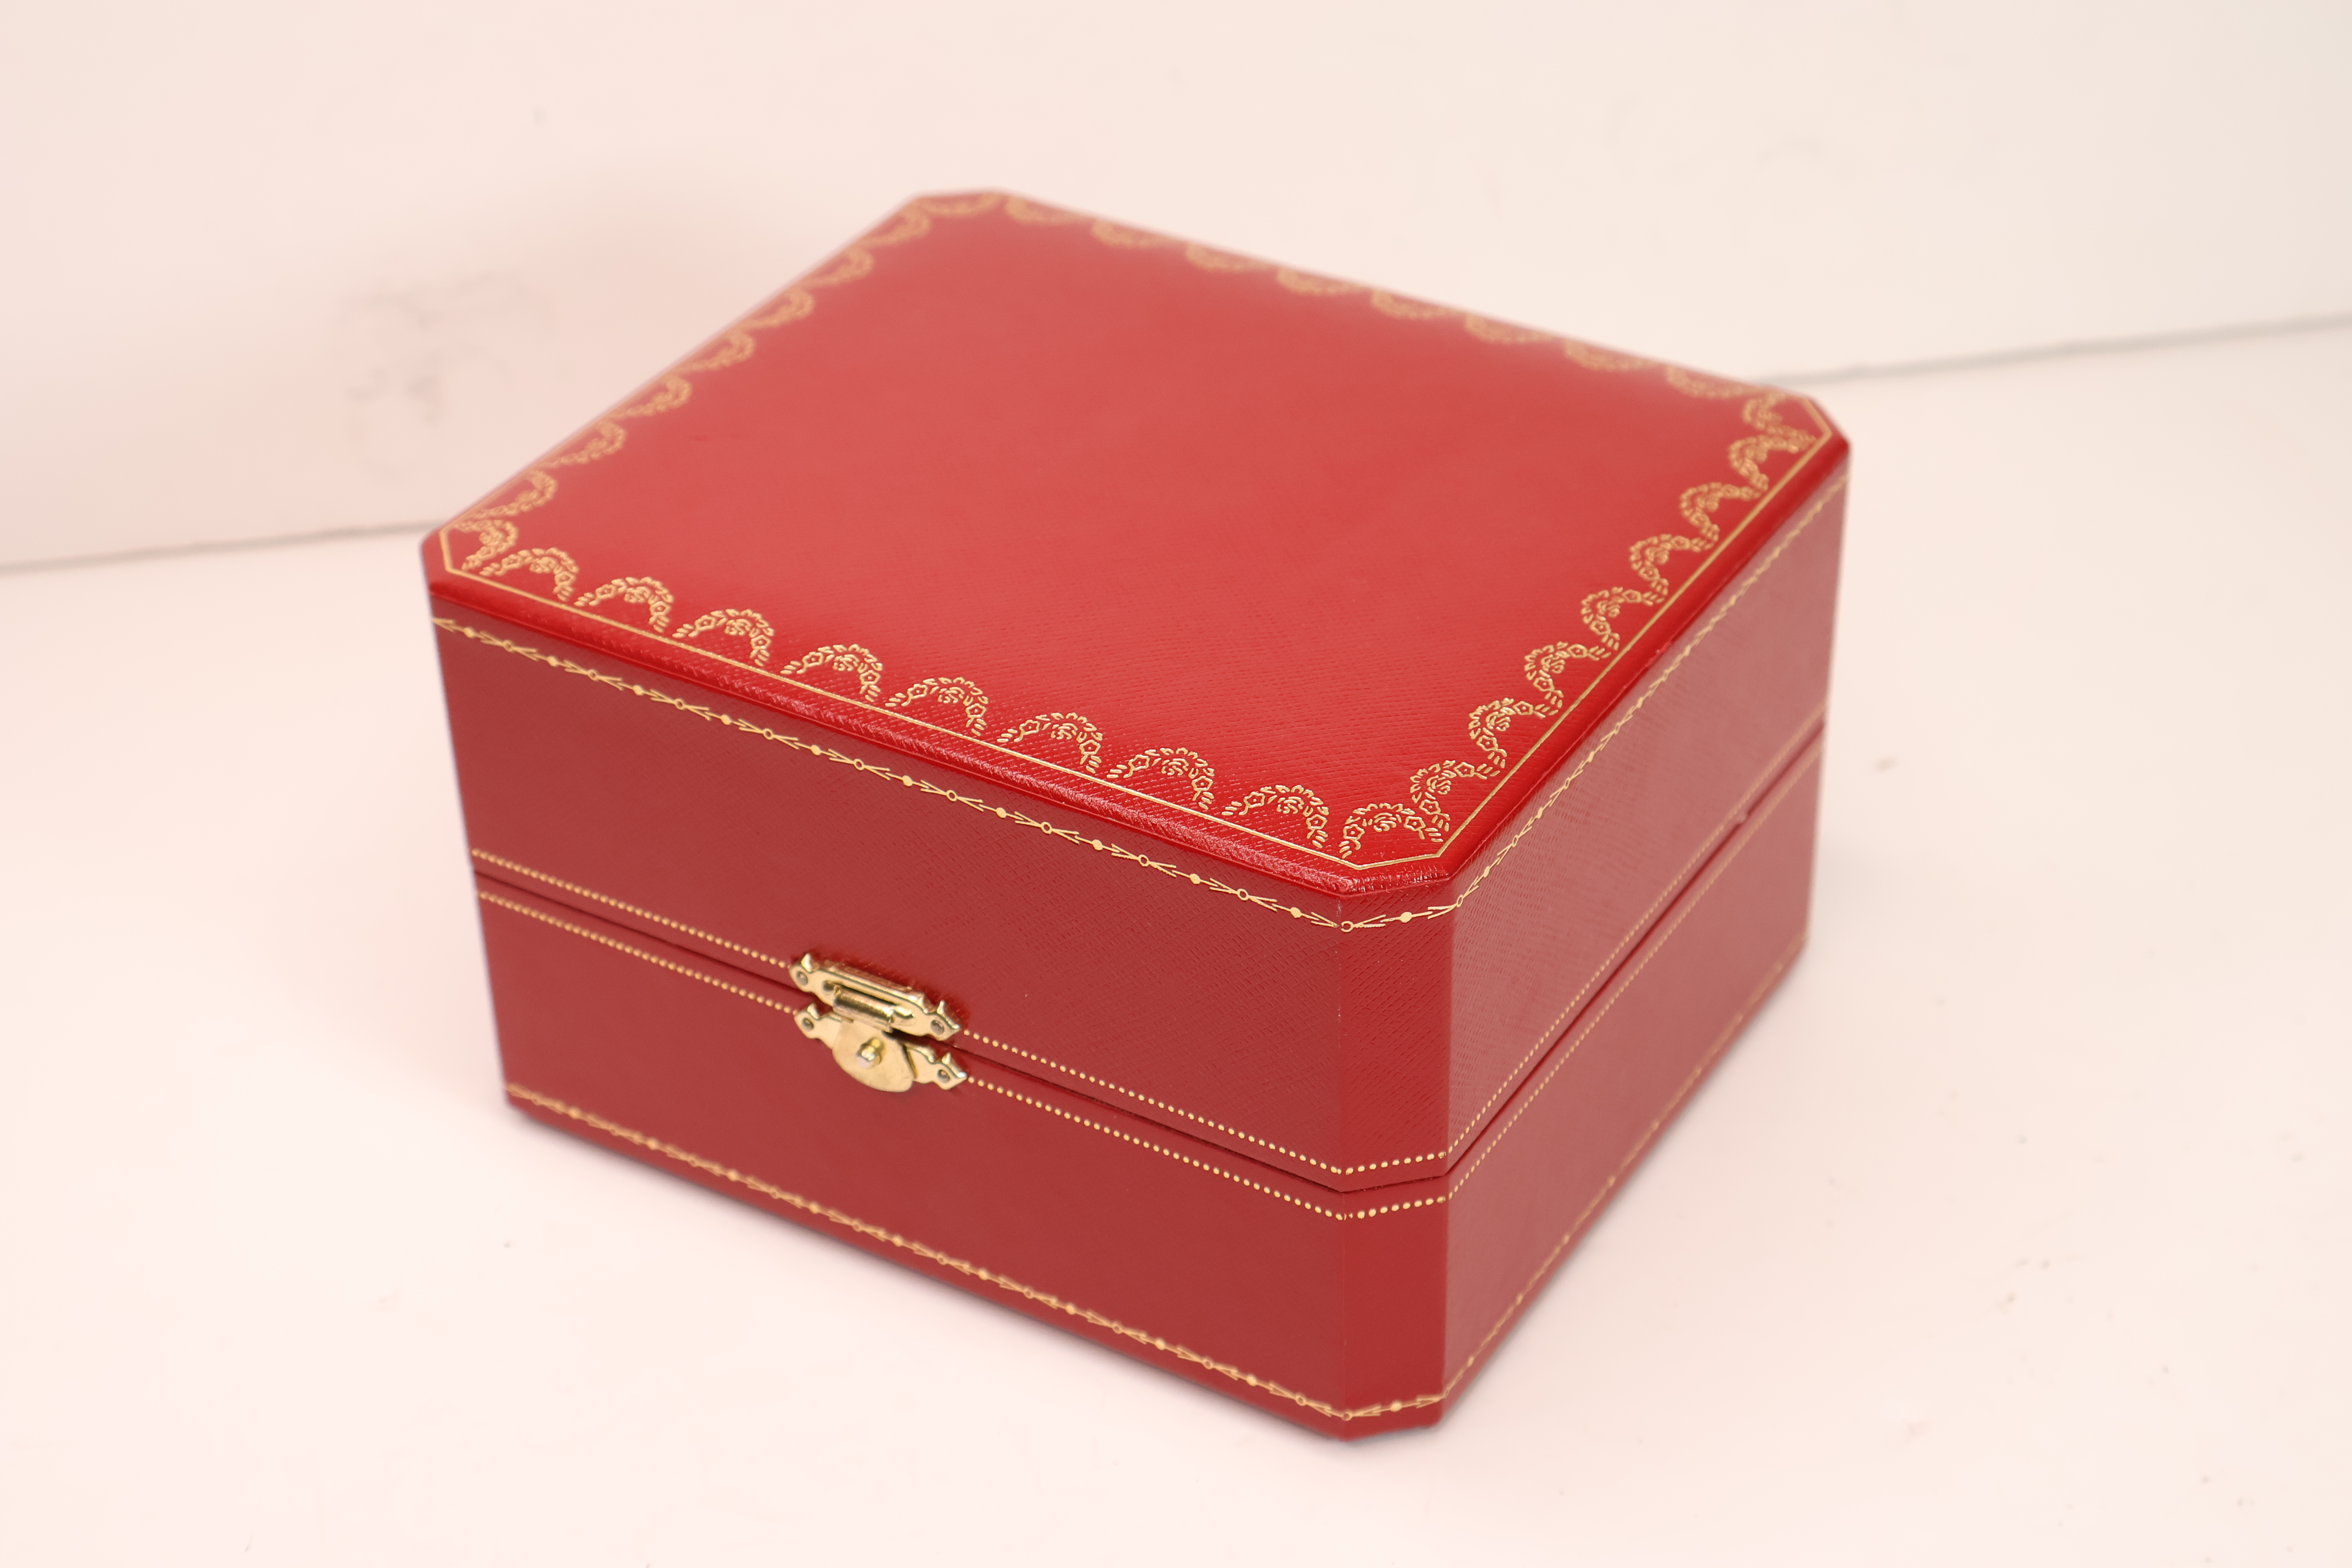 *To Be Sold Without Reserve* Cartier watch box, missing cushion - Image 2 of 2